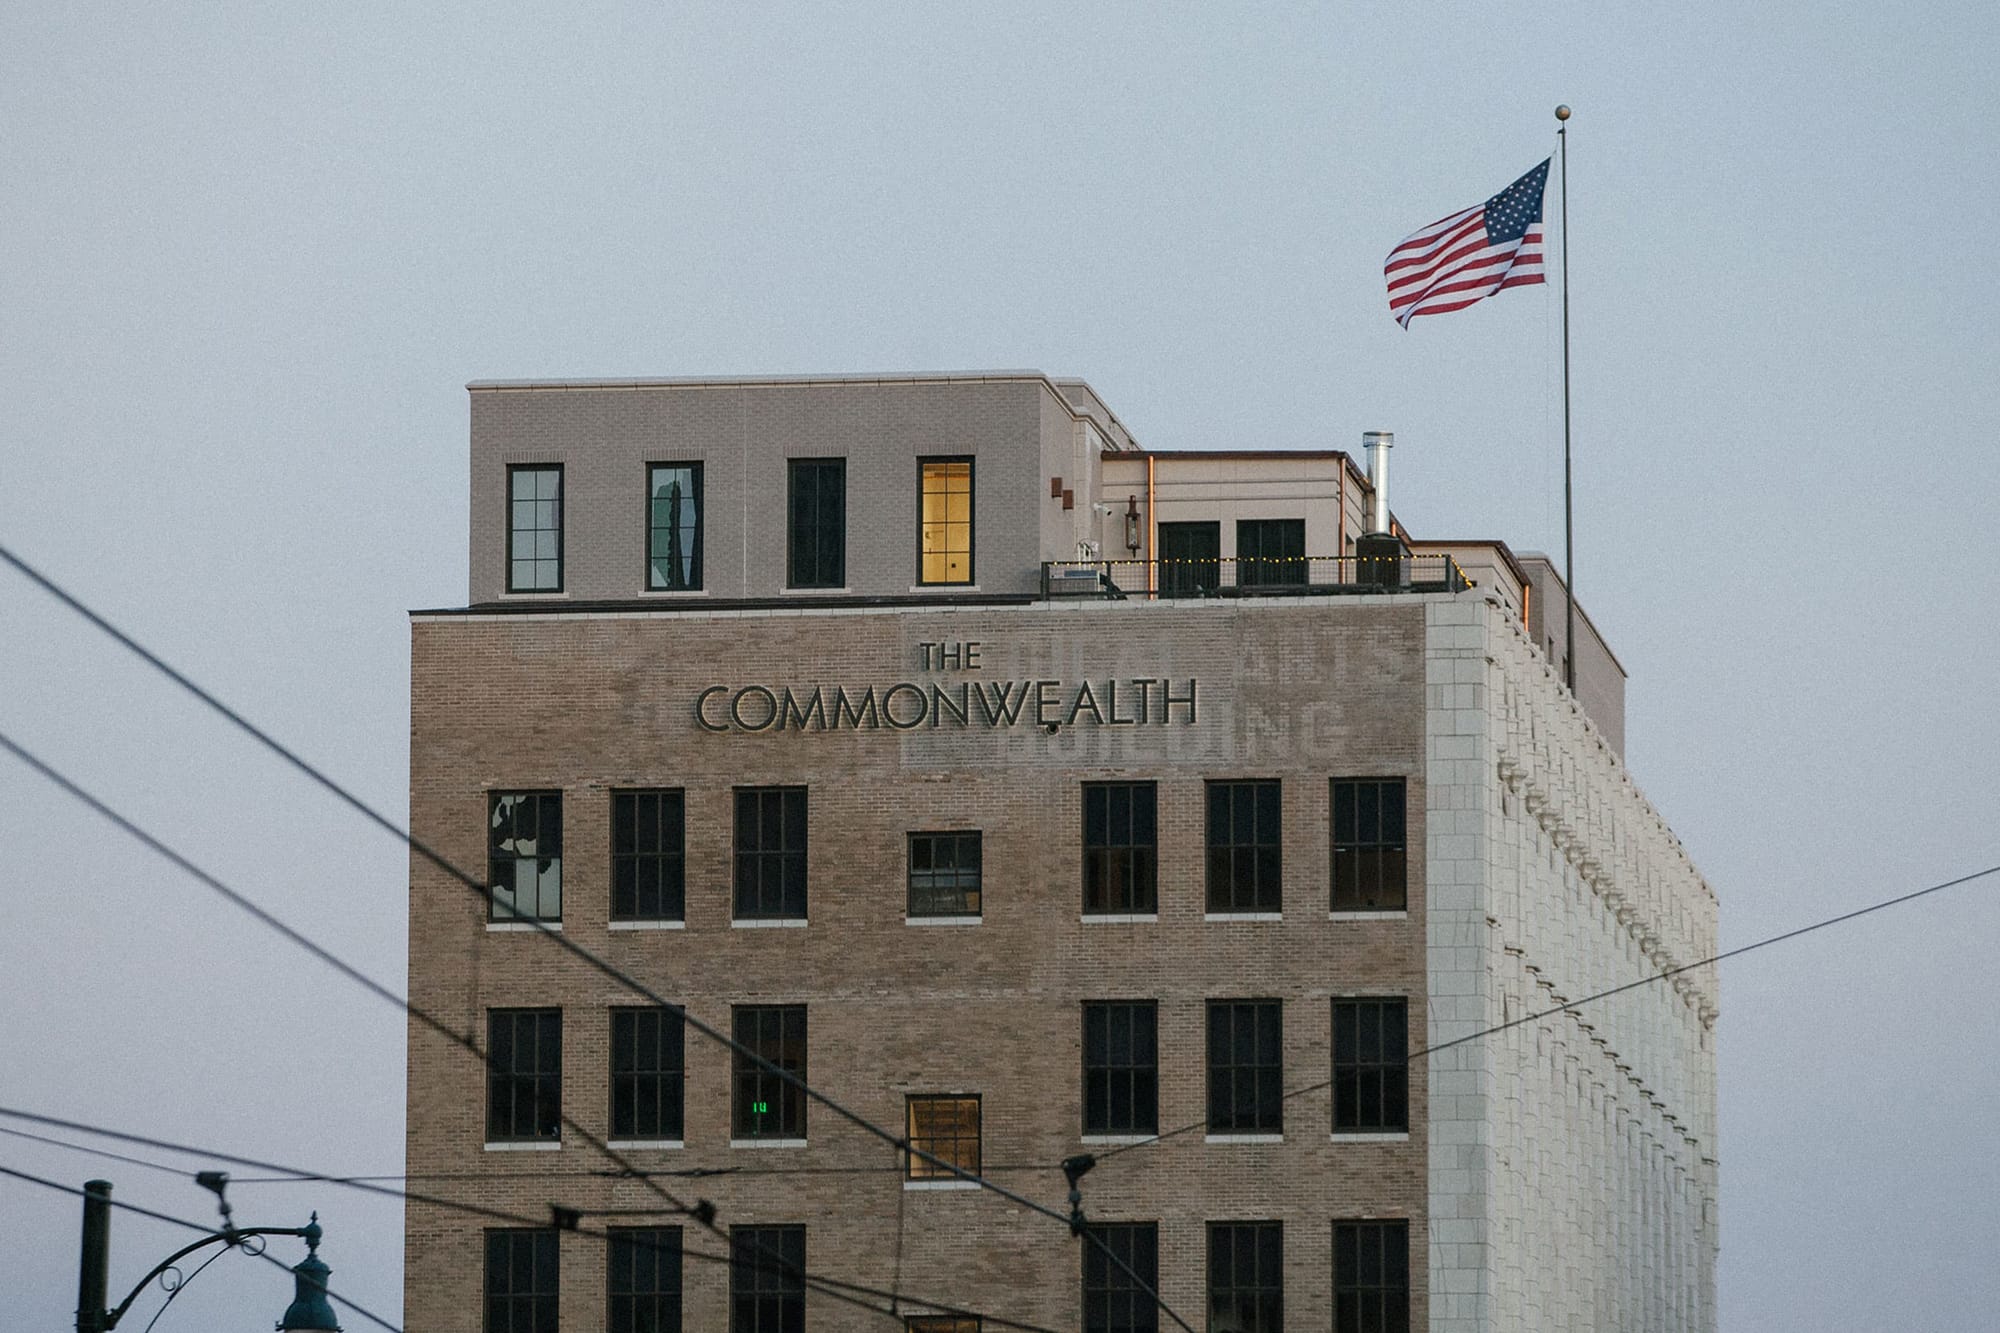 The Commonwealth in Memphis – renovated building showing main sign